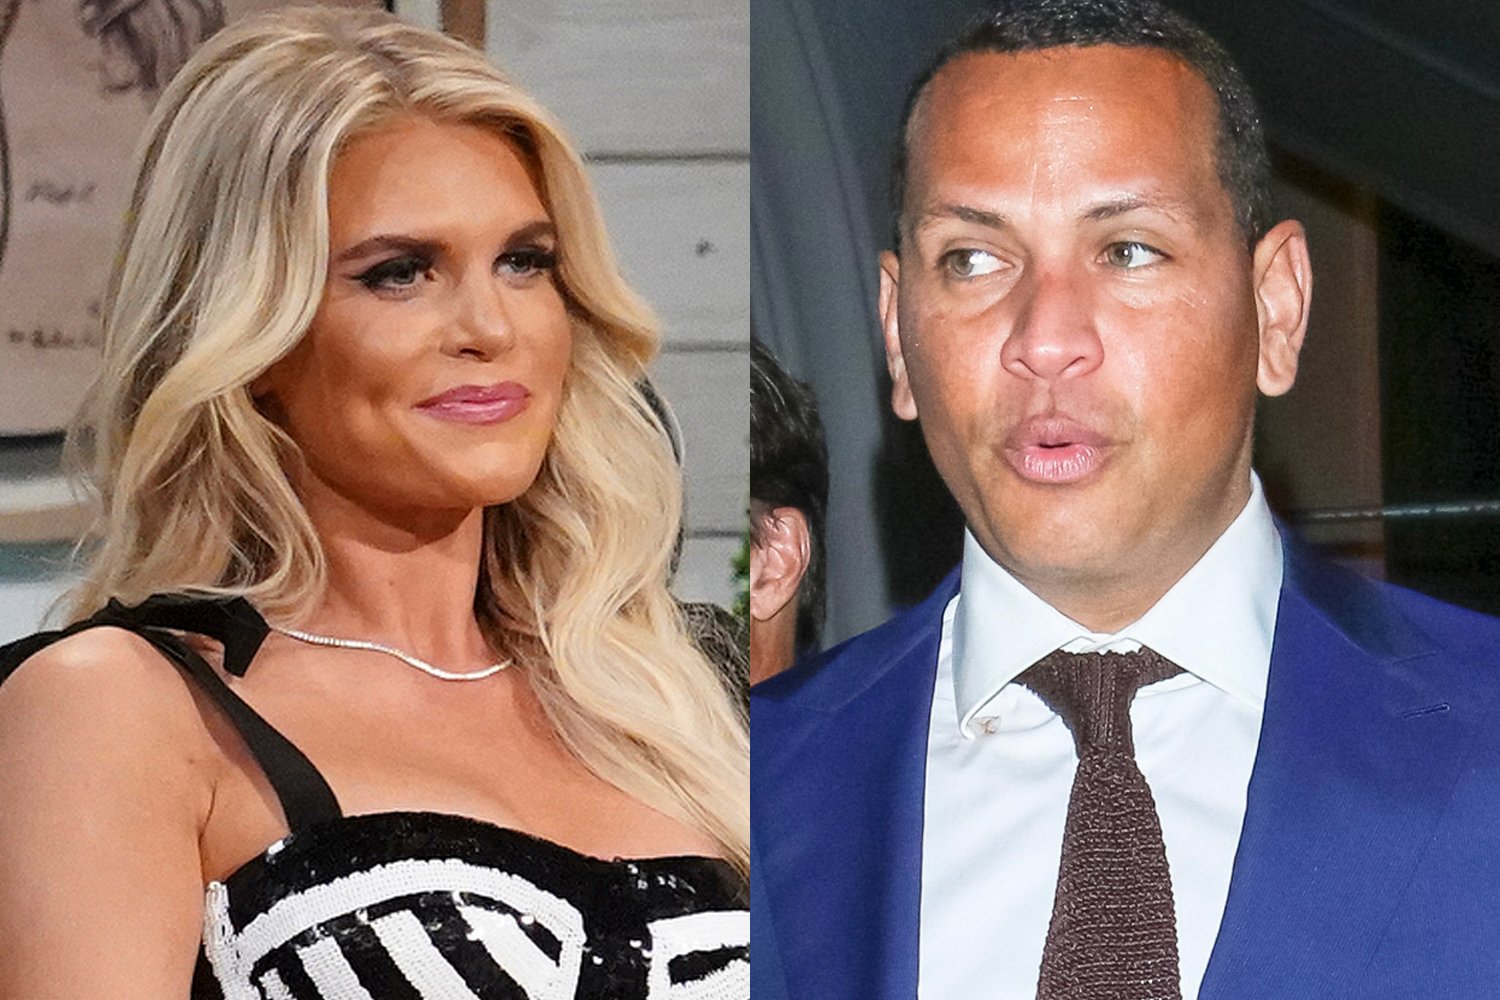 'Southern Charm' star Madison LeCroy and Alex Rodriguez